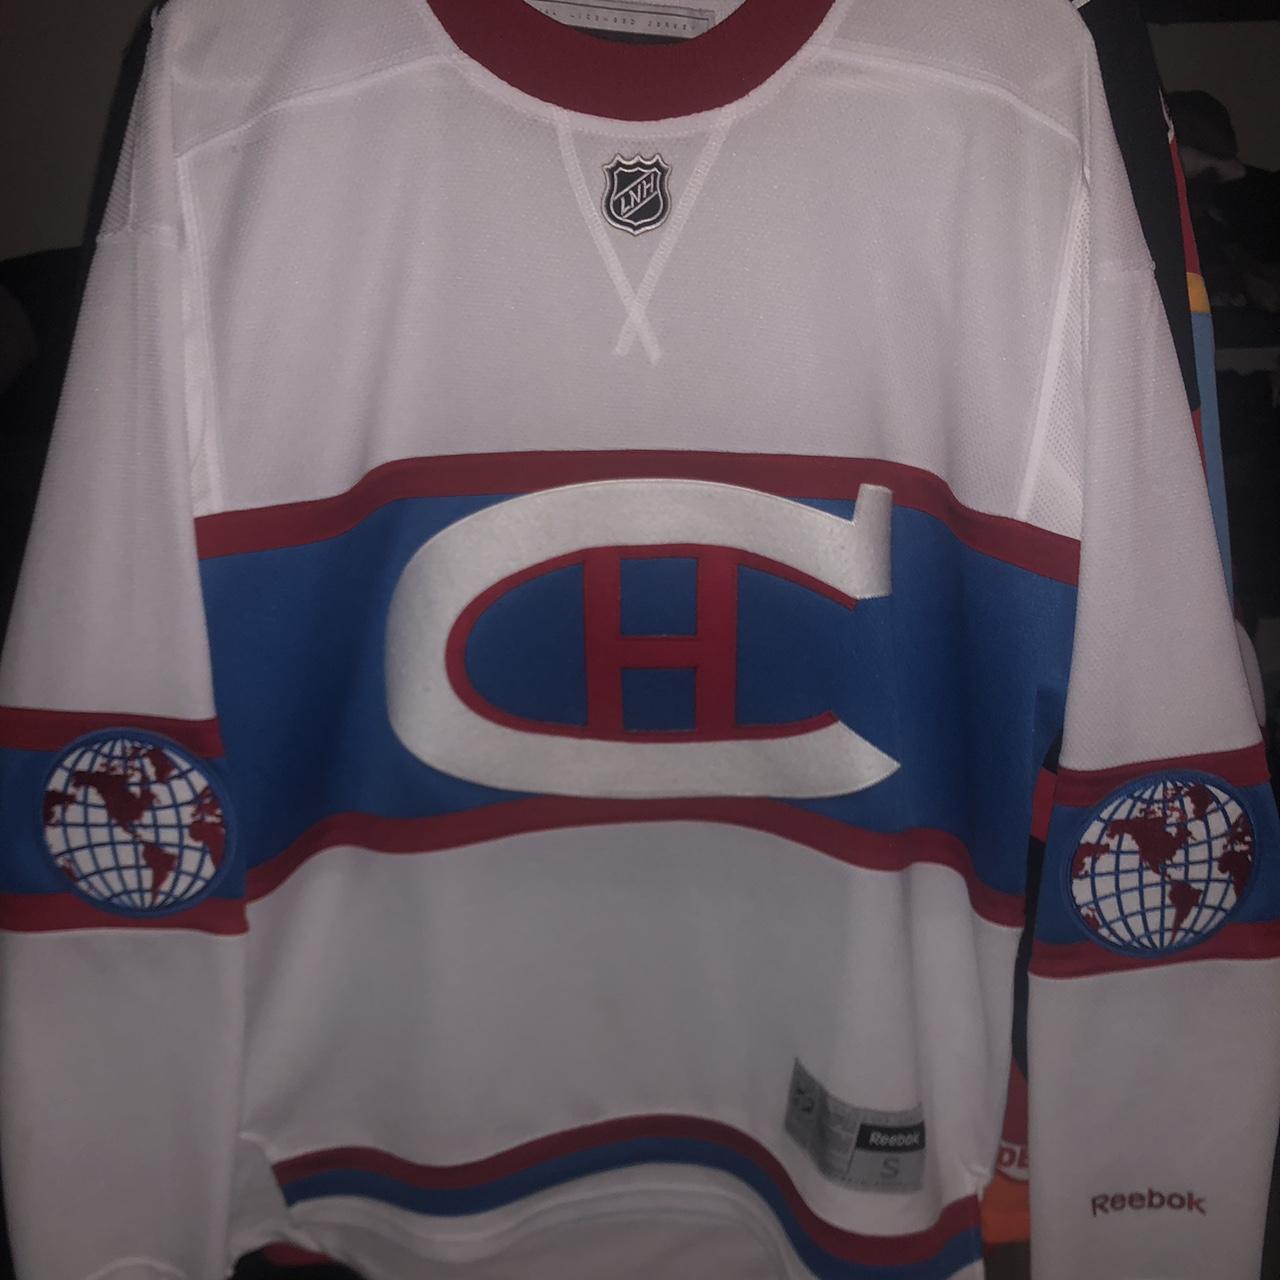 Montreal Canadiens new jersey designed for the 2016 Winter Classic -   BLOG